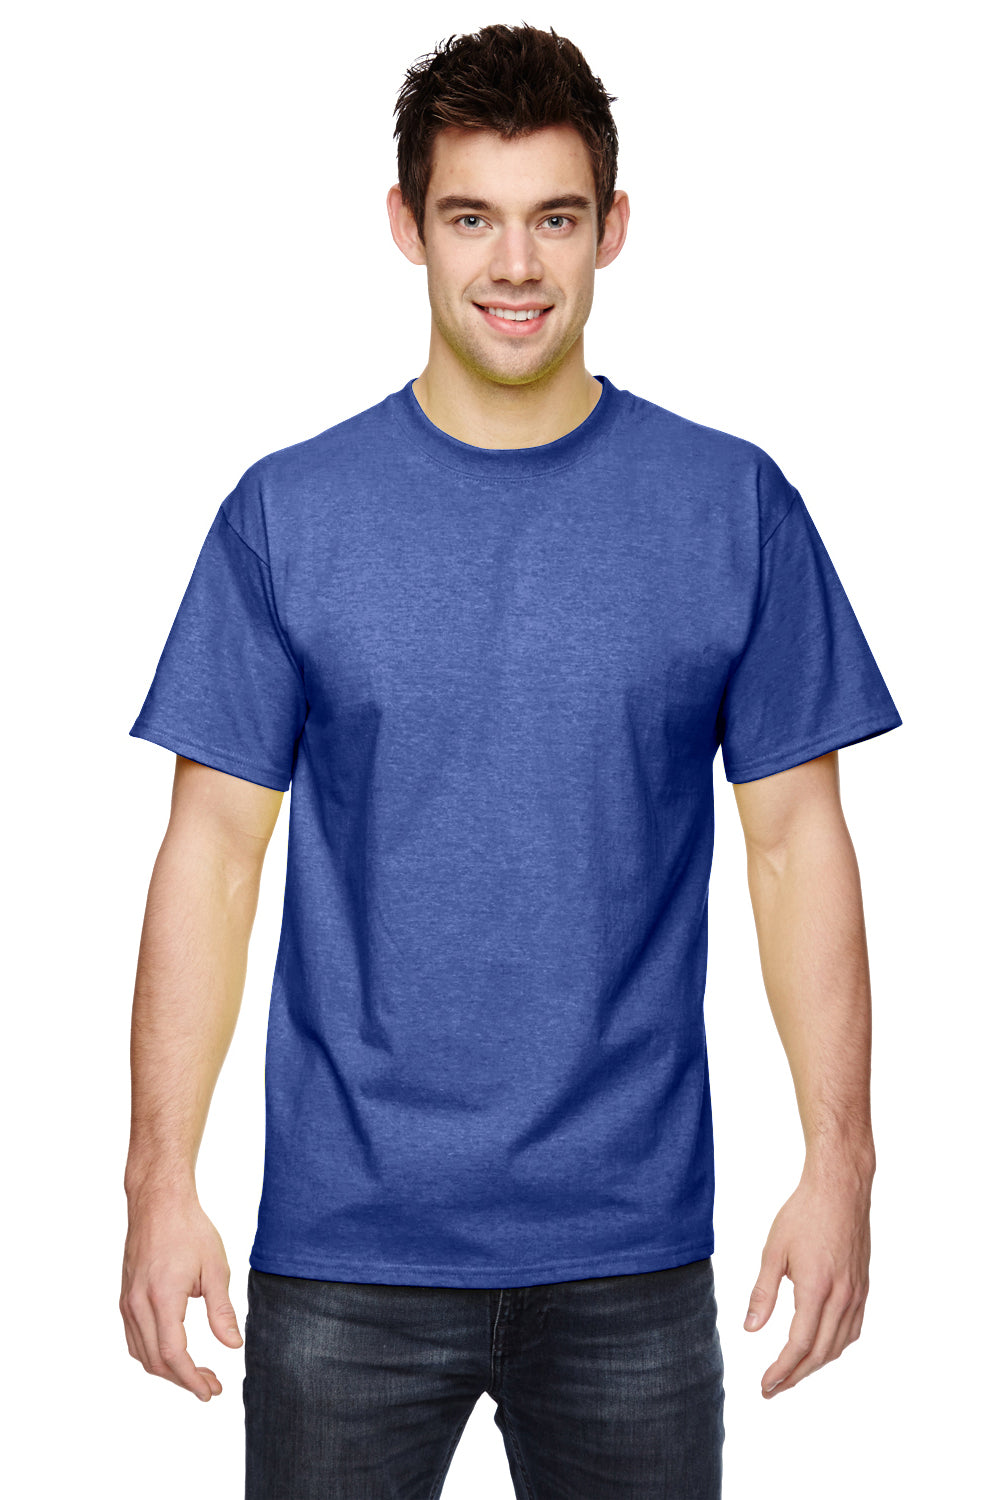 Fruit Of The Loom 3931 Mens HD Jersey Short Sleeve Crewneck T-Shirt Admiral Blue Front